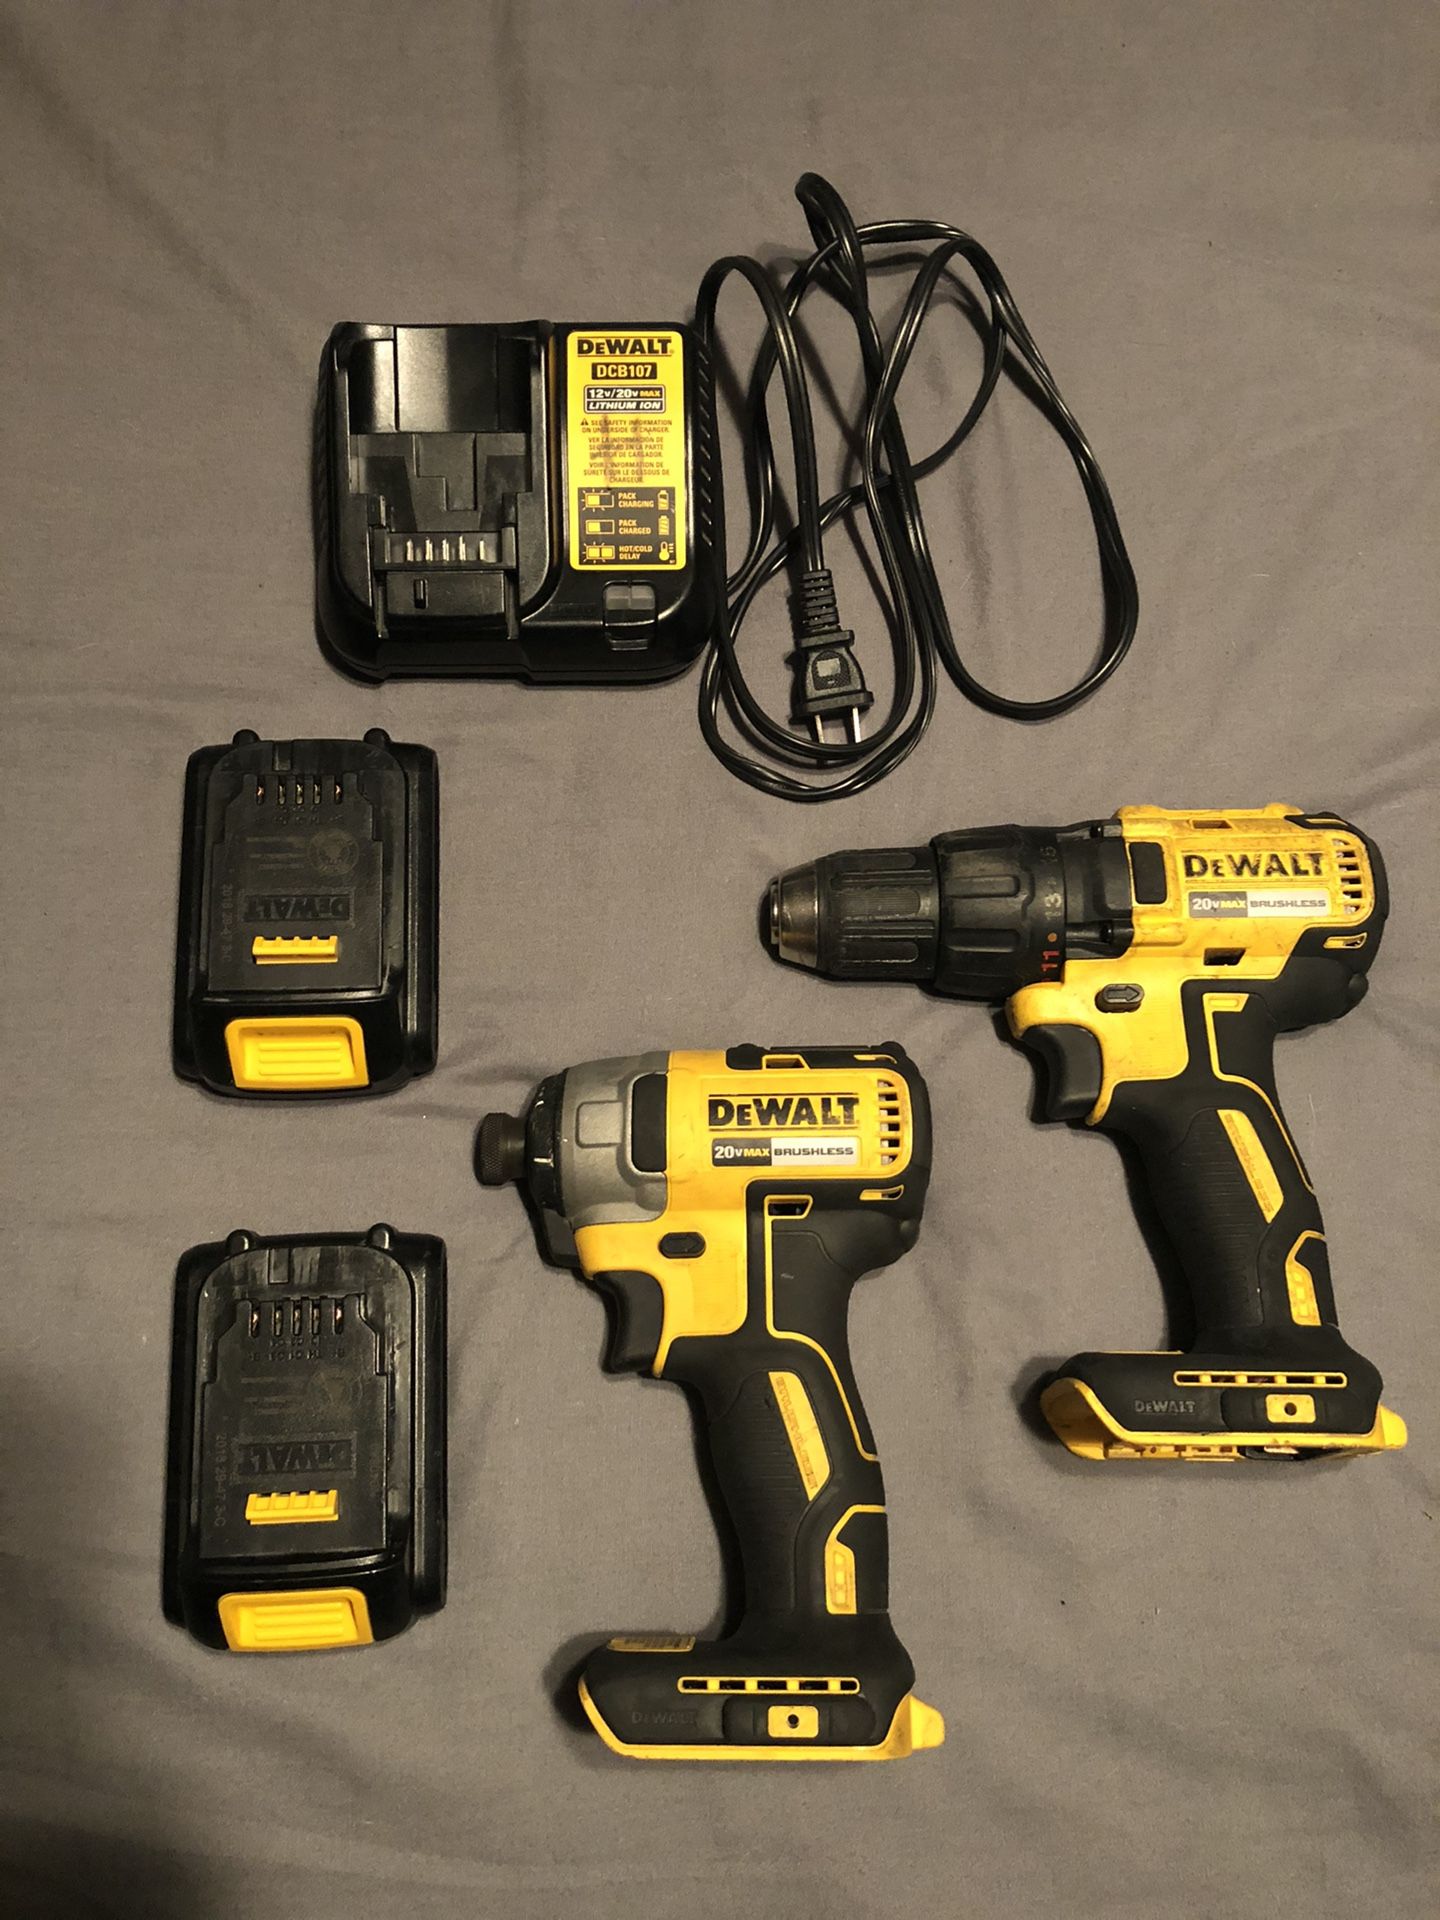 DeWalt 20V Drill and Impact w/ 2 batteries 1.3 Ah and charger